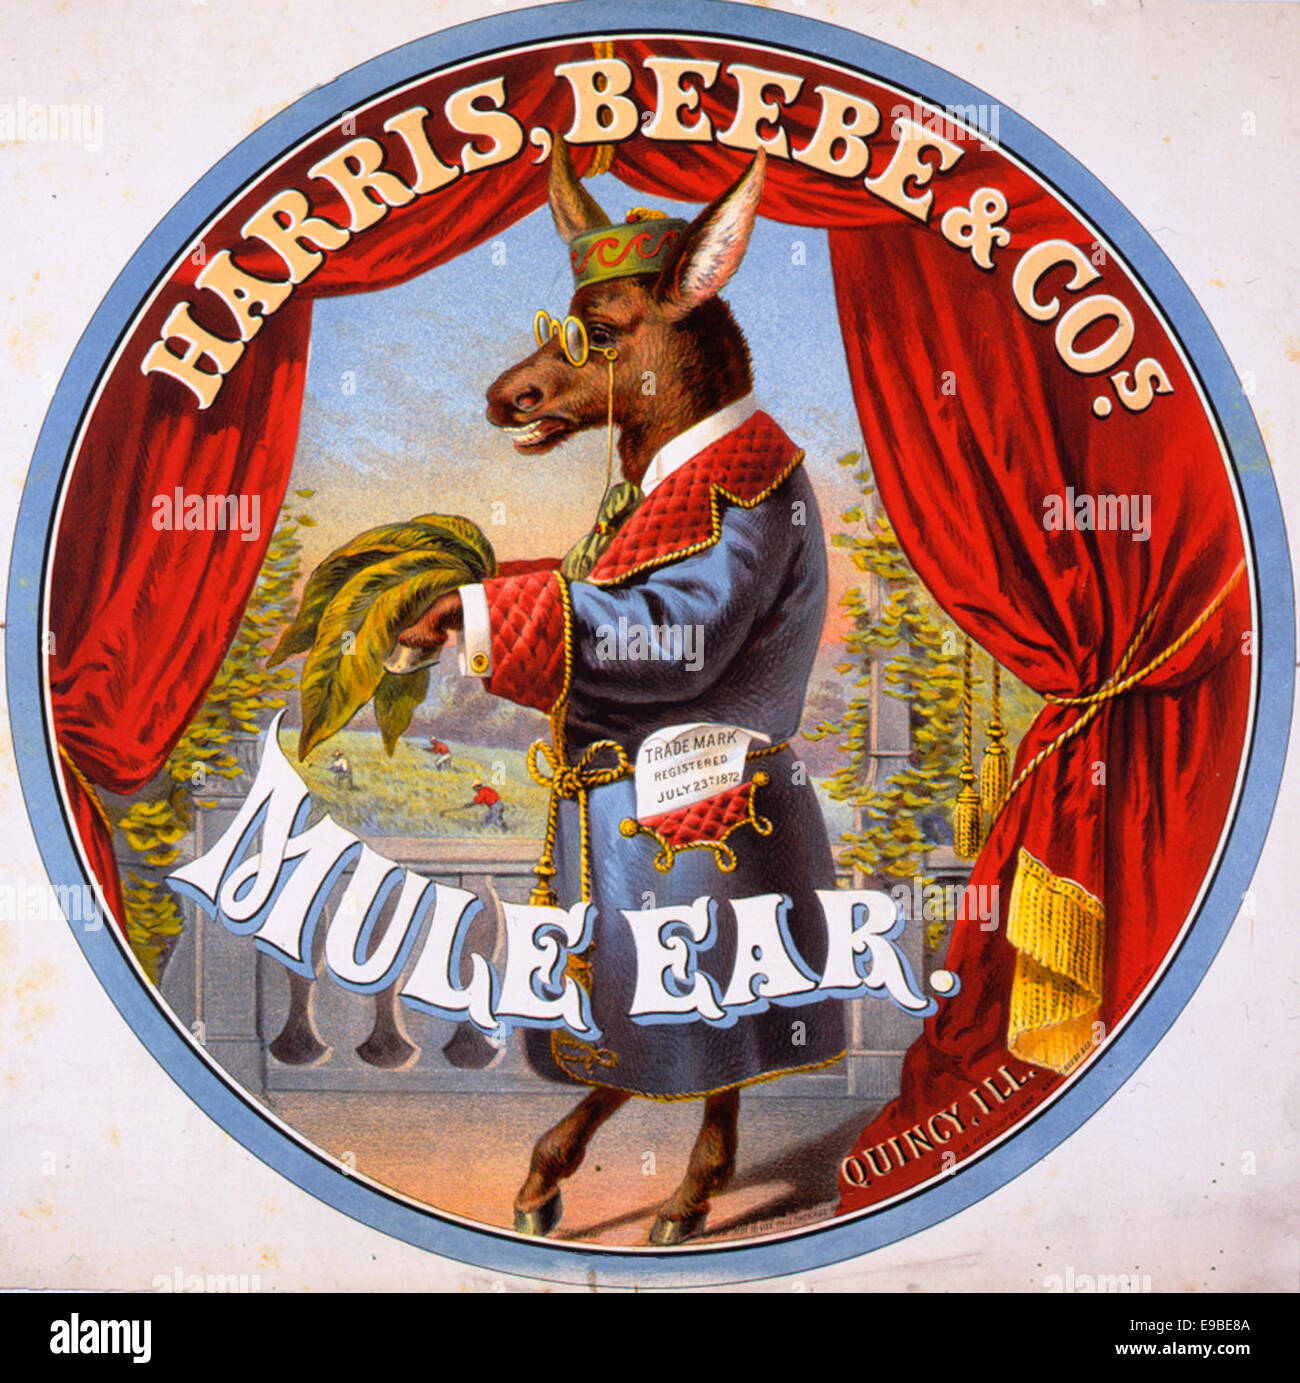 Mule Ear - Tobacco label showing full-length portrait of a mule standing on hind legs, wearing robe and glasses, and carrying tobacco leaves. 1868 Stock Photo